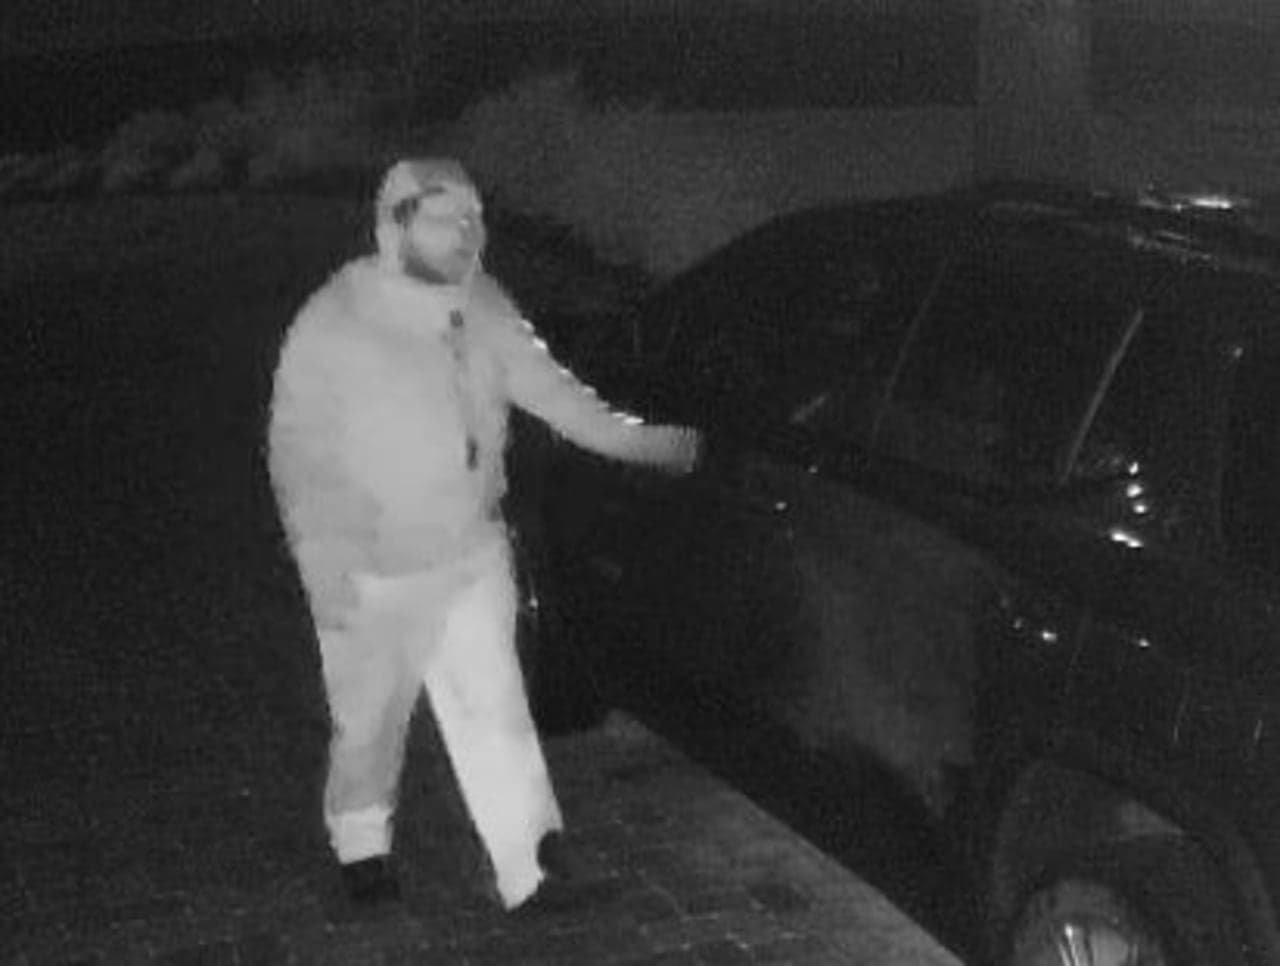 Man suspected of stealing cash from unlocked car parked on Grassy Pond Drive on Saturday, May 4 around 3 a.m.